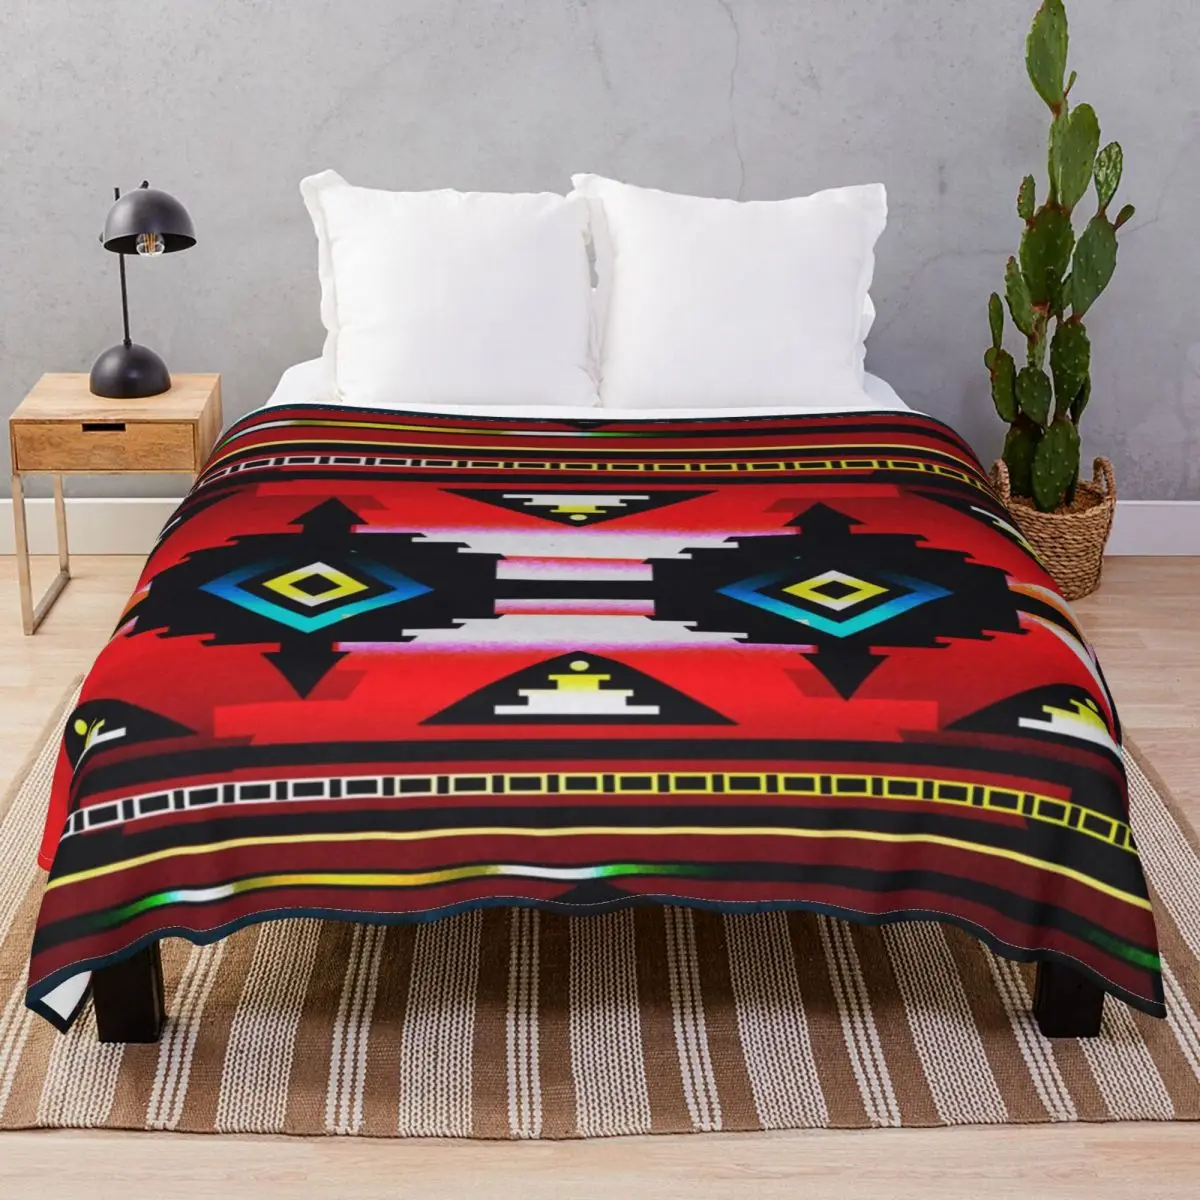 El Camino Blankets Flannel All Season Multi-function Throw Blanket for Bedding Home Couch Camp Office